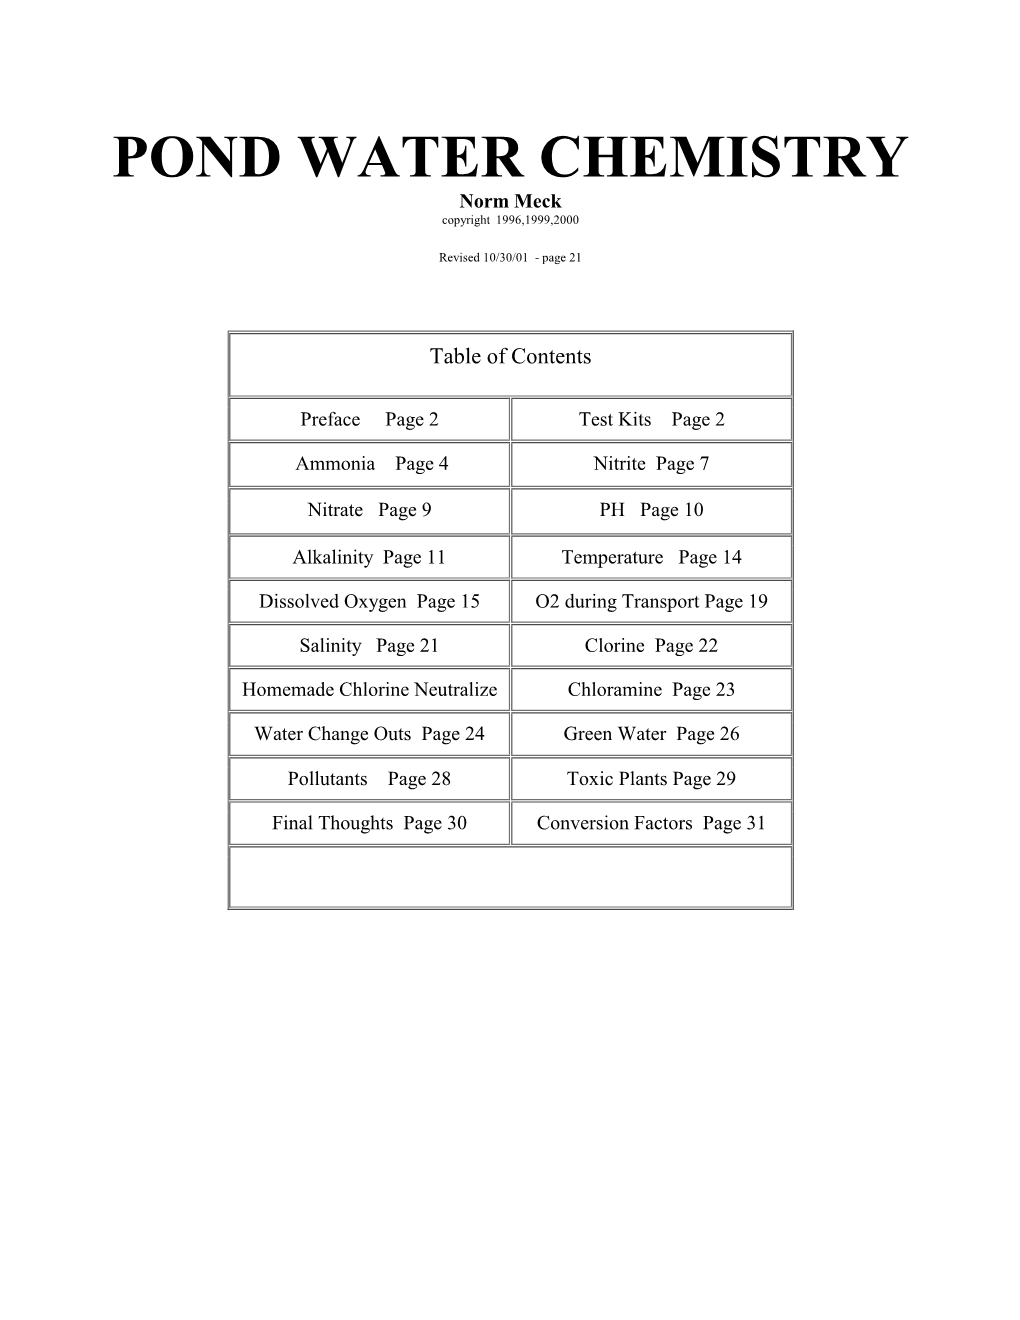 POND WATER CHEMISTRY Norm Meck Copyright 1996,1999,2000